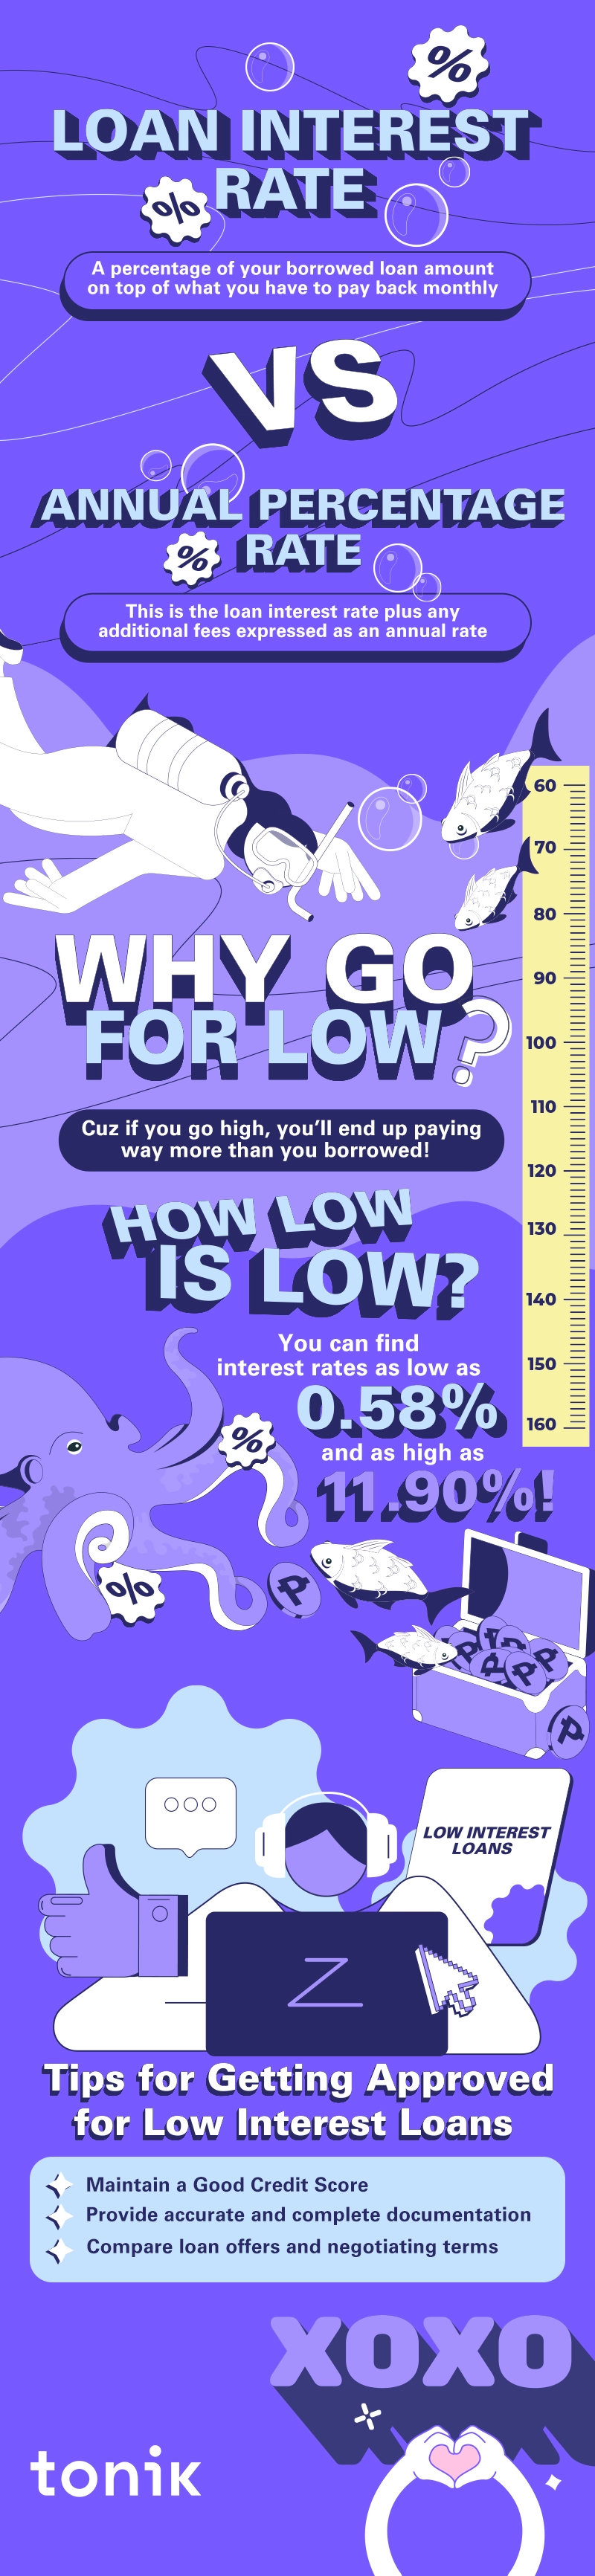 infrographic about online loans with low interest rates in the Philippines